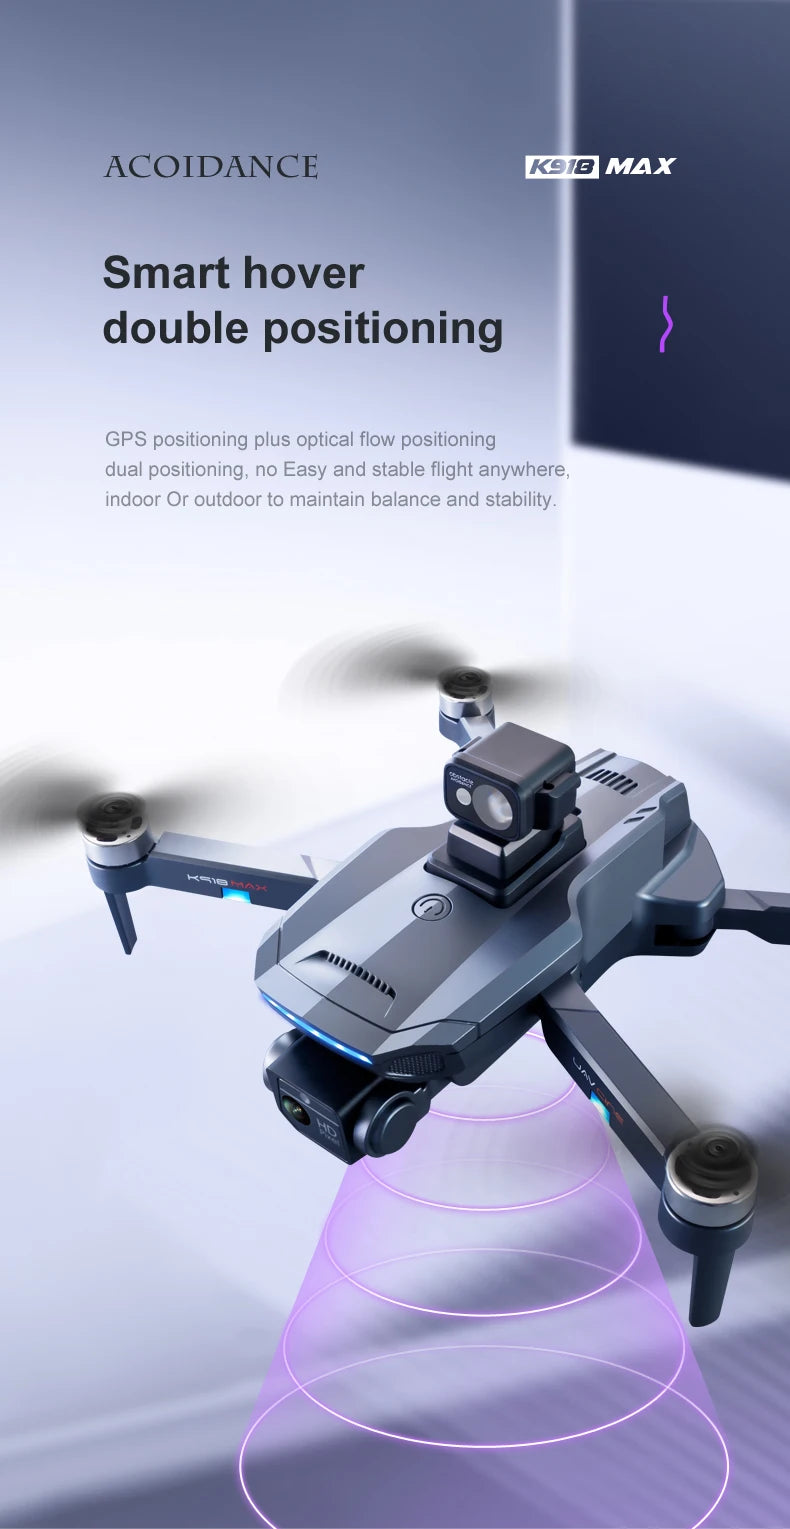 XYRC K918 MAX GPS Drone, ss Easy Lneading is a smart hover system with GPS positioning